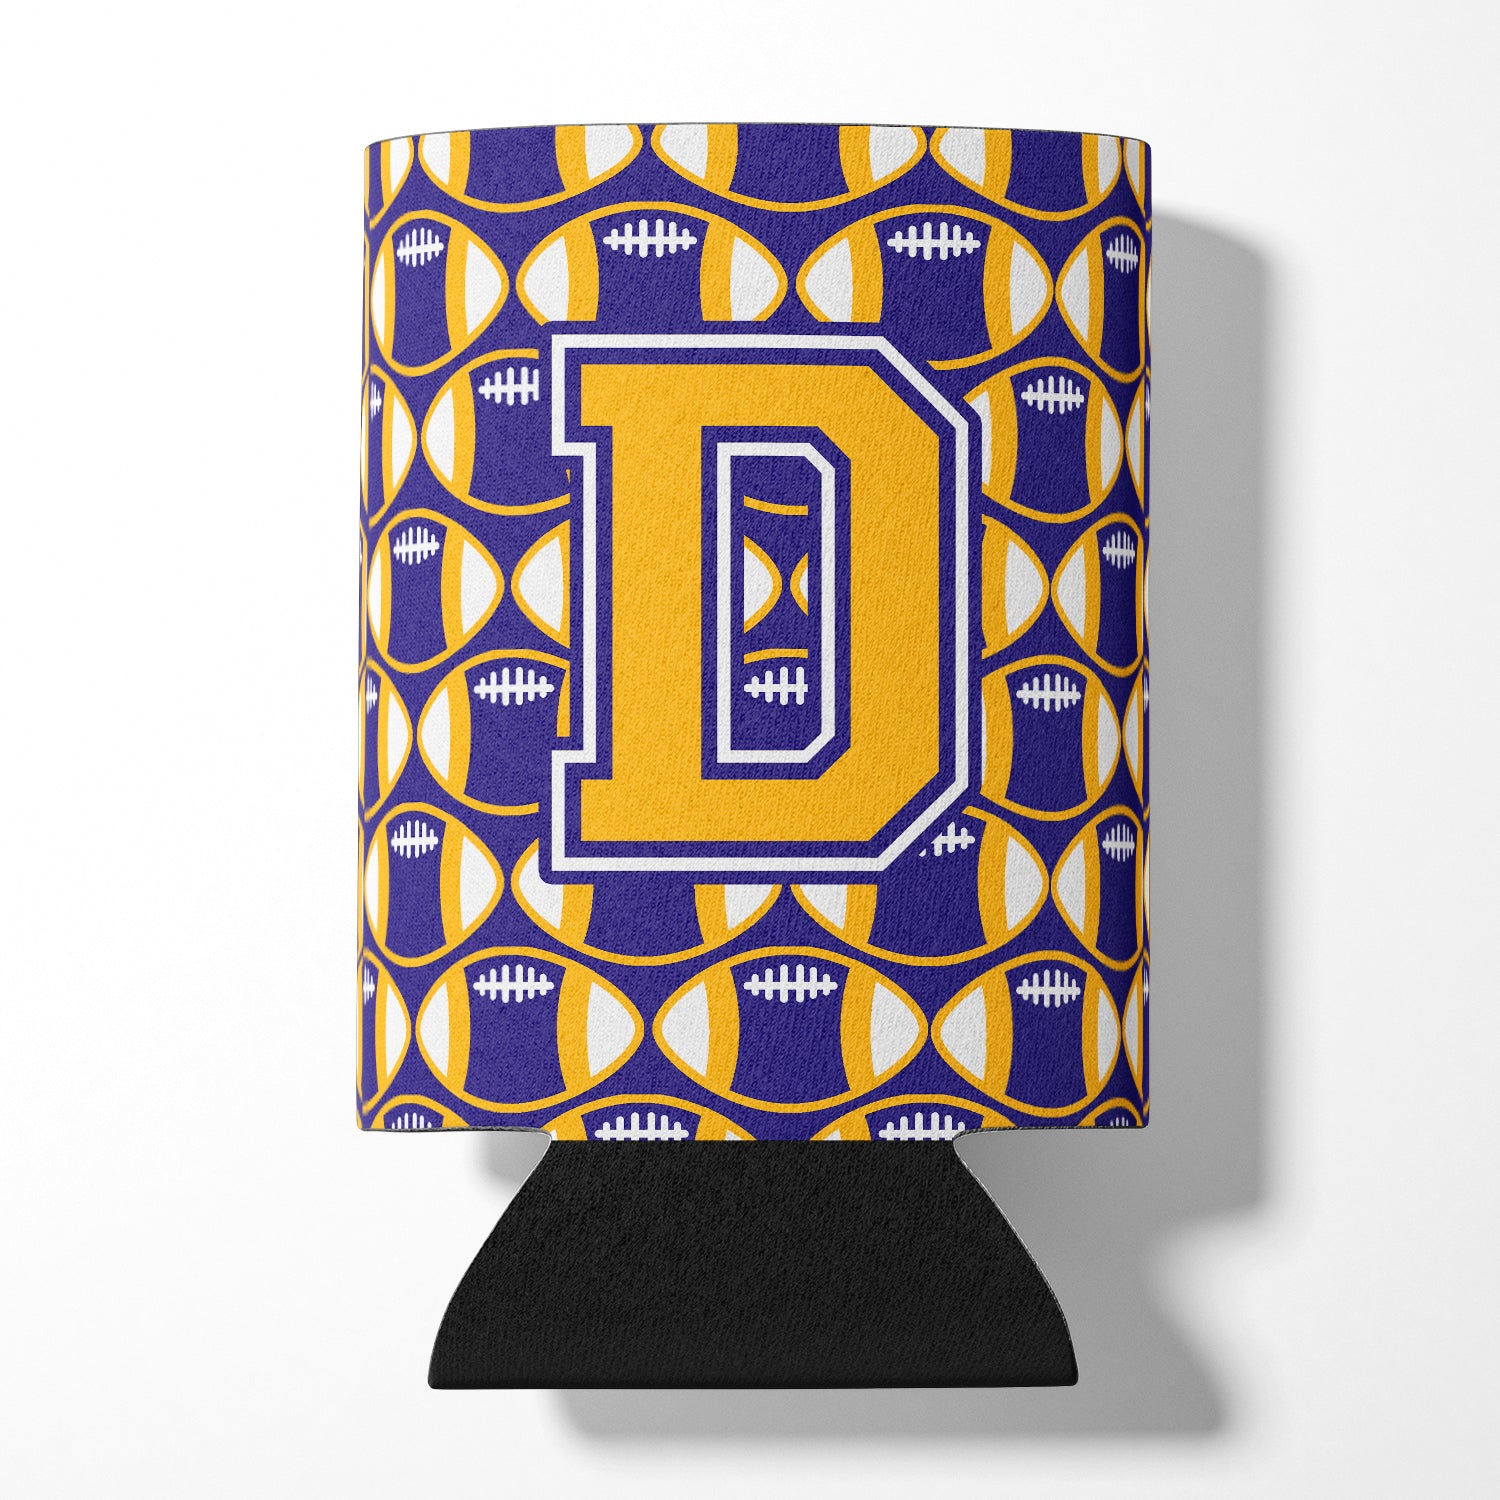 Letter D Football Purple and Gold Can or Bottle Hugger CJ1064-DCC